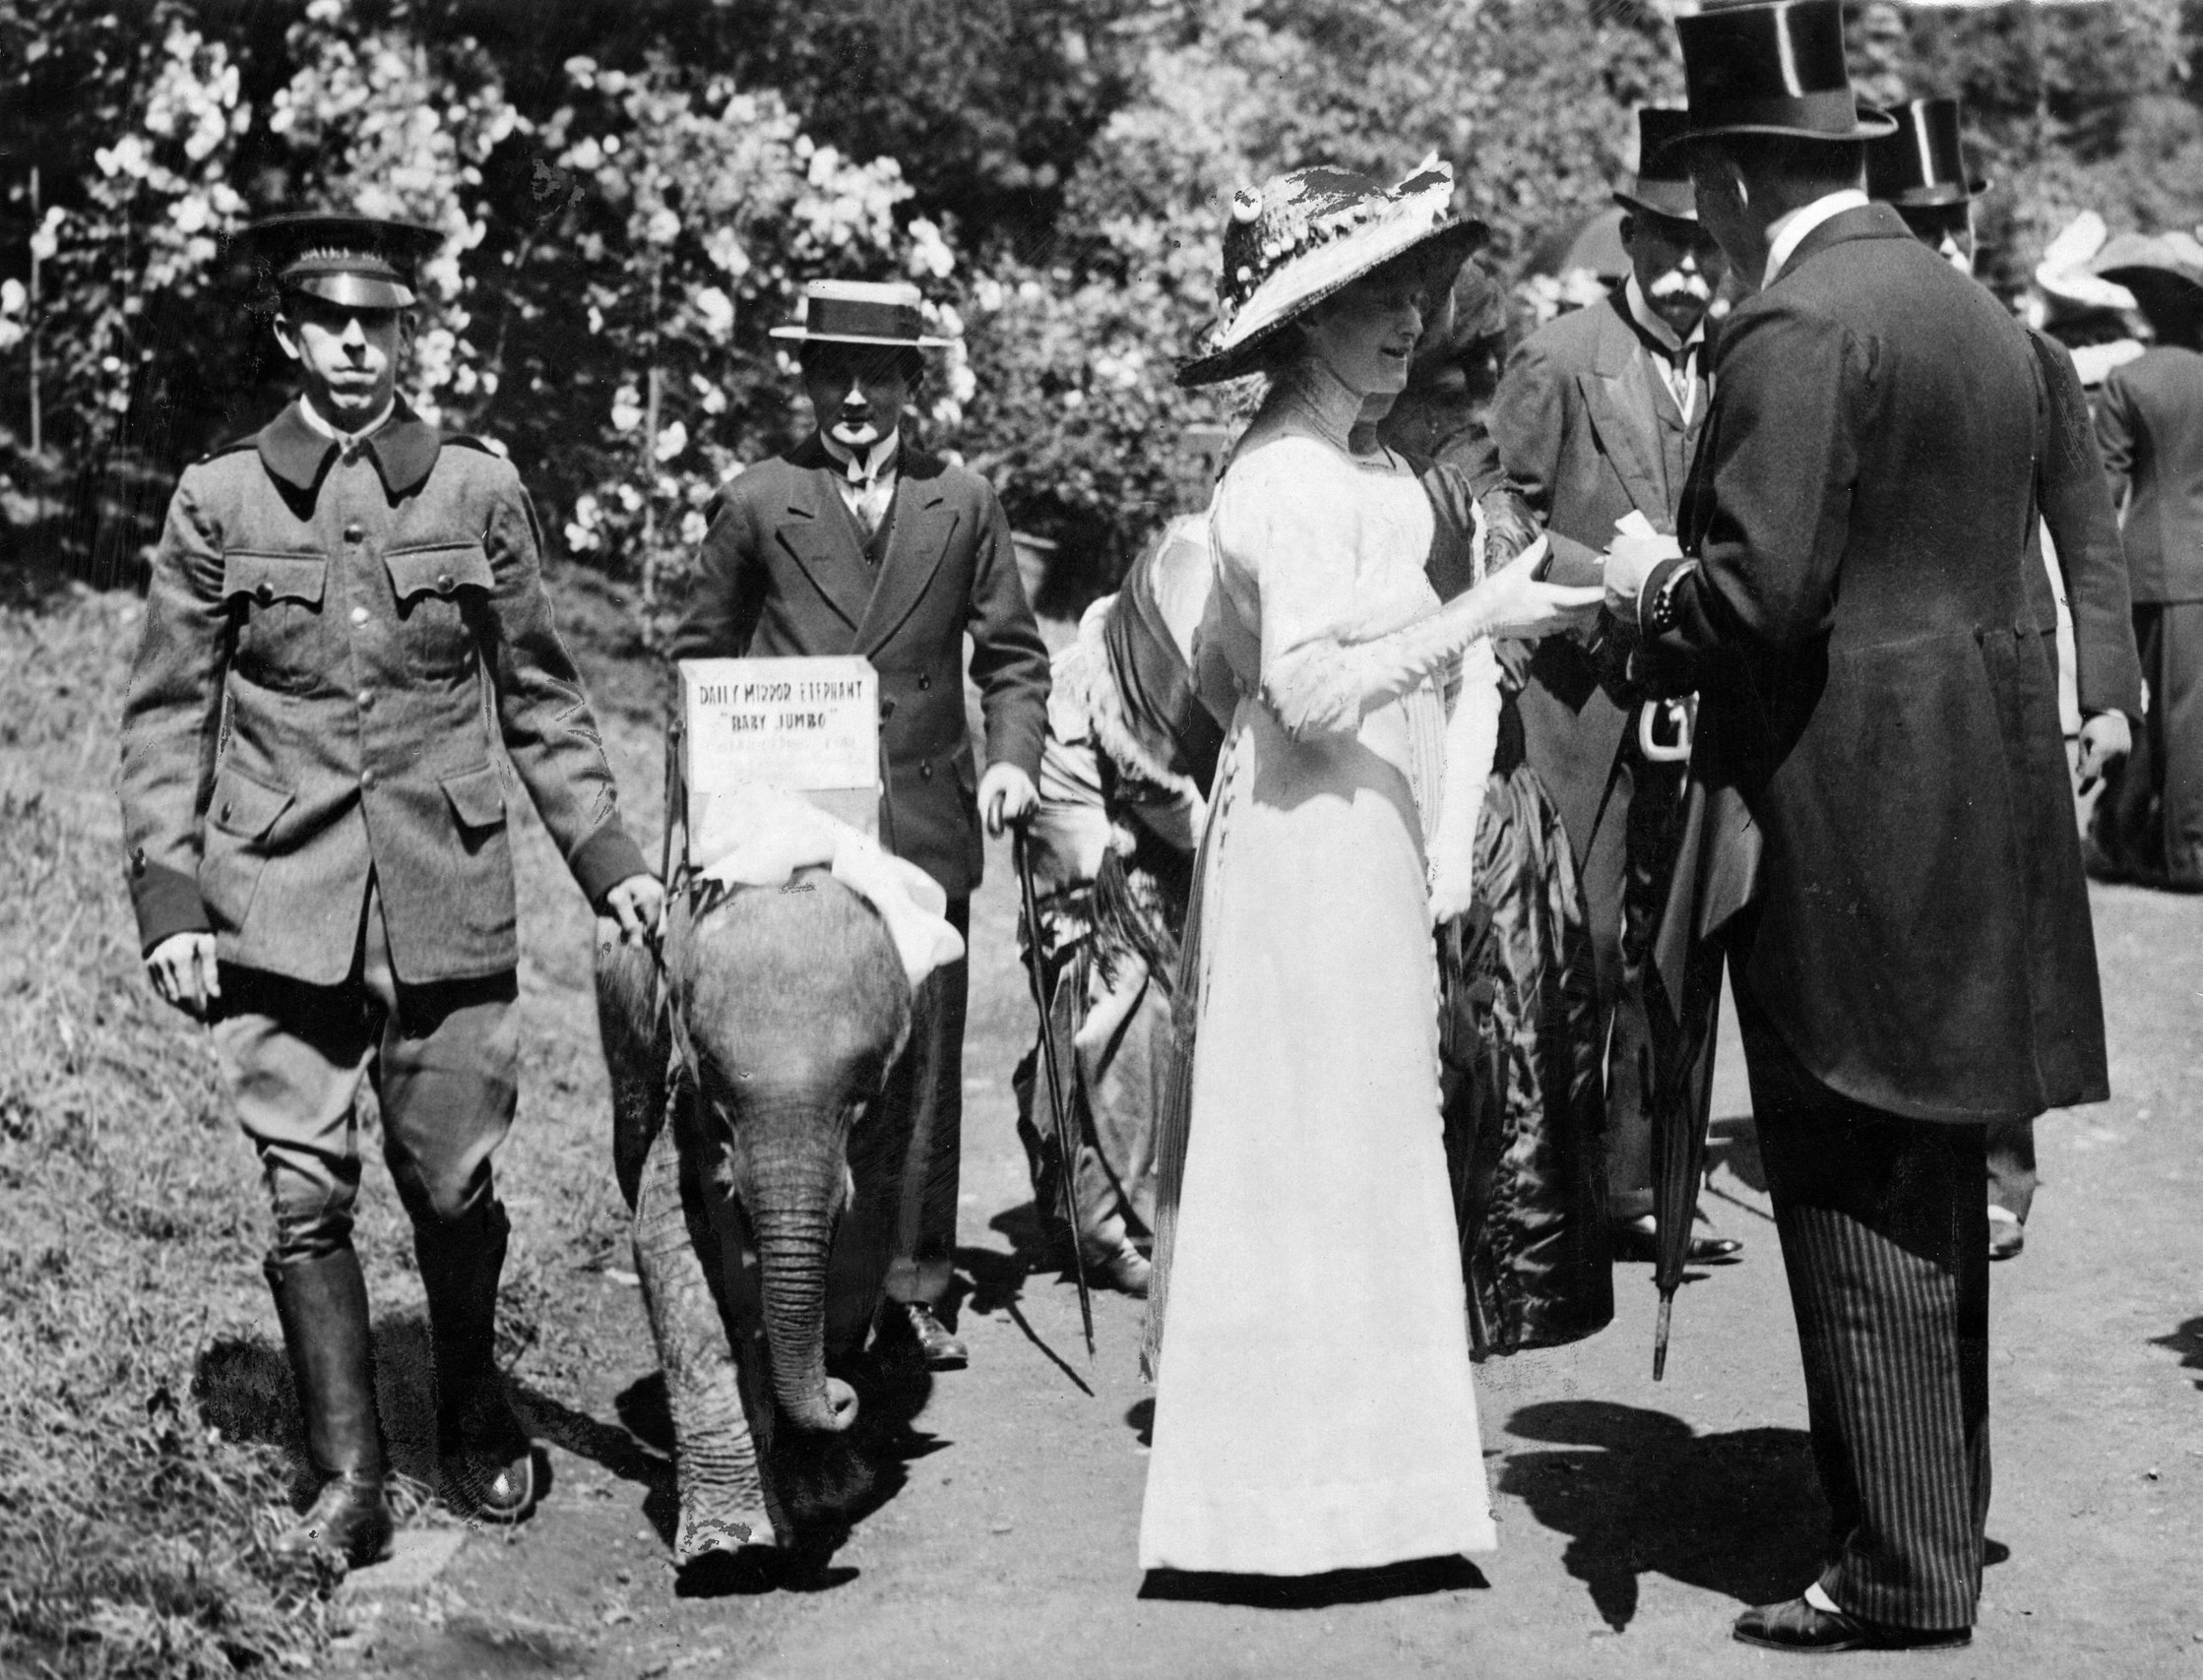 Elephant at Chelsea flower show. May 1912